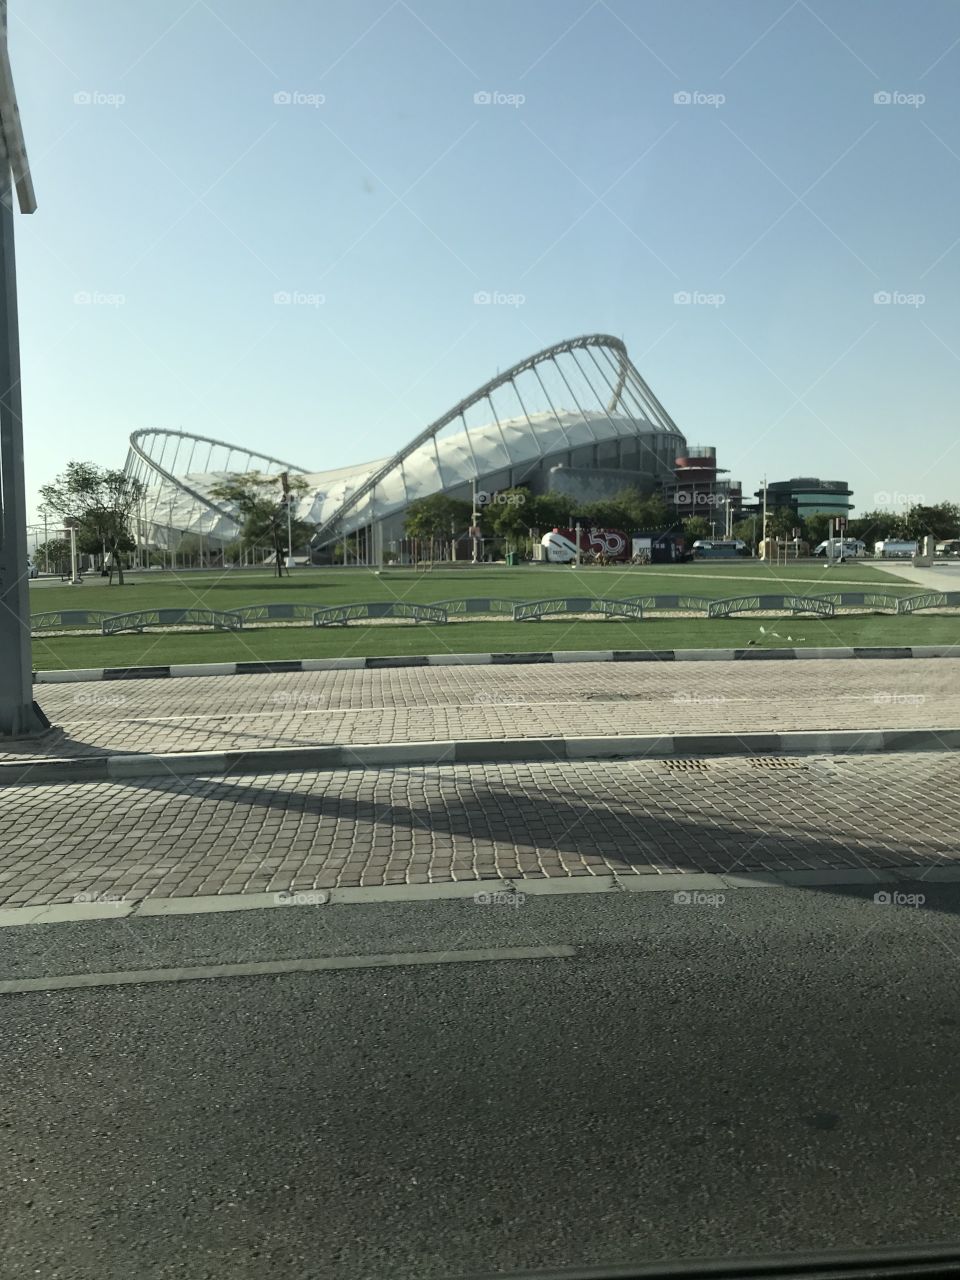 Khalifa International stadium, one of the stadiums where the next world cup will be played at!!